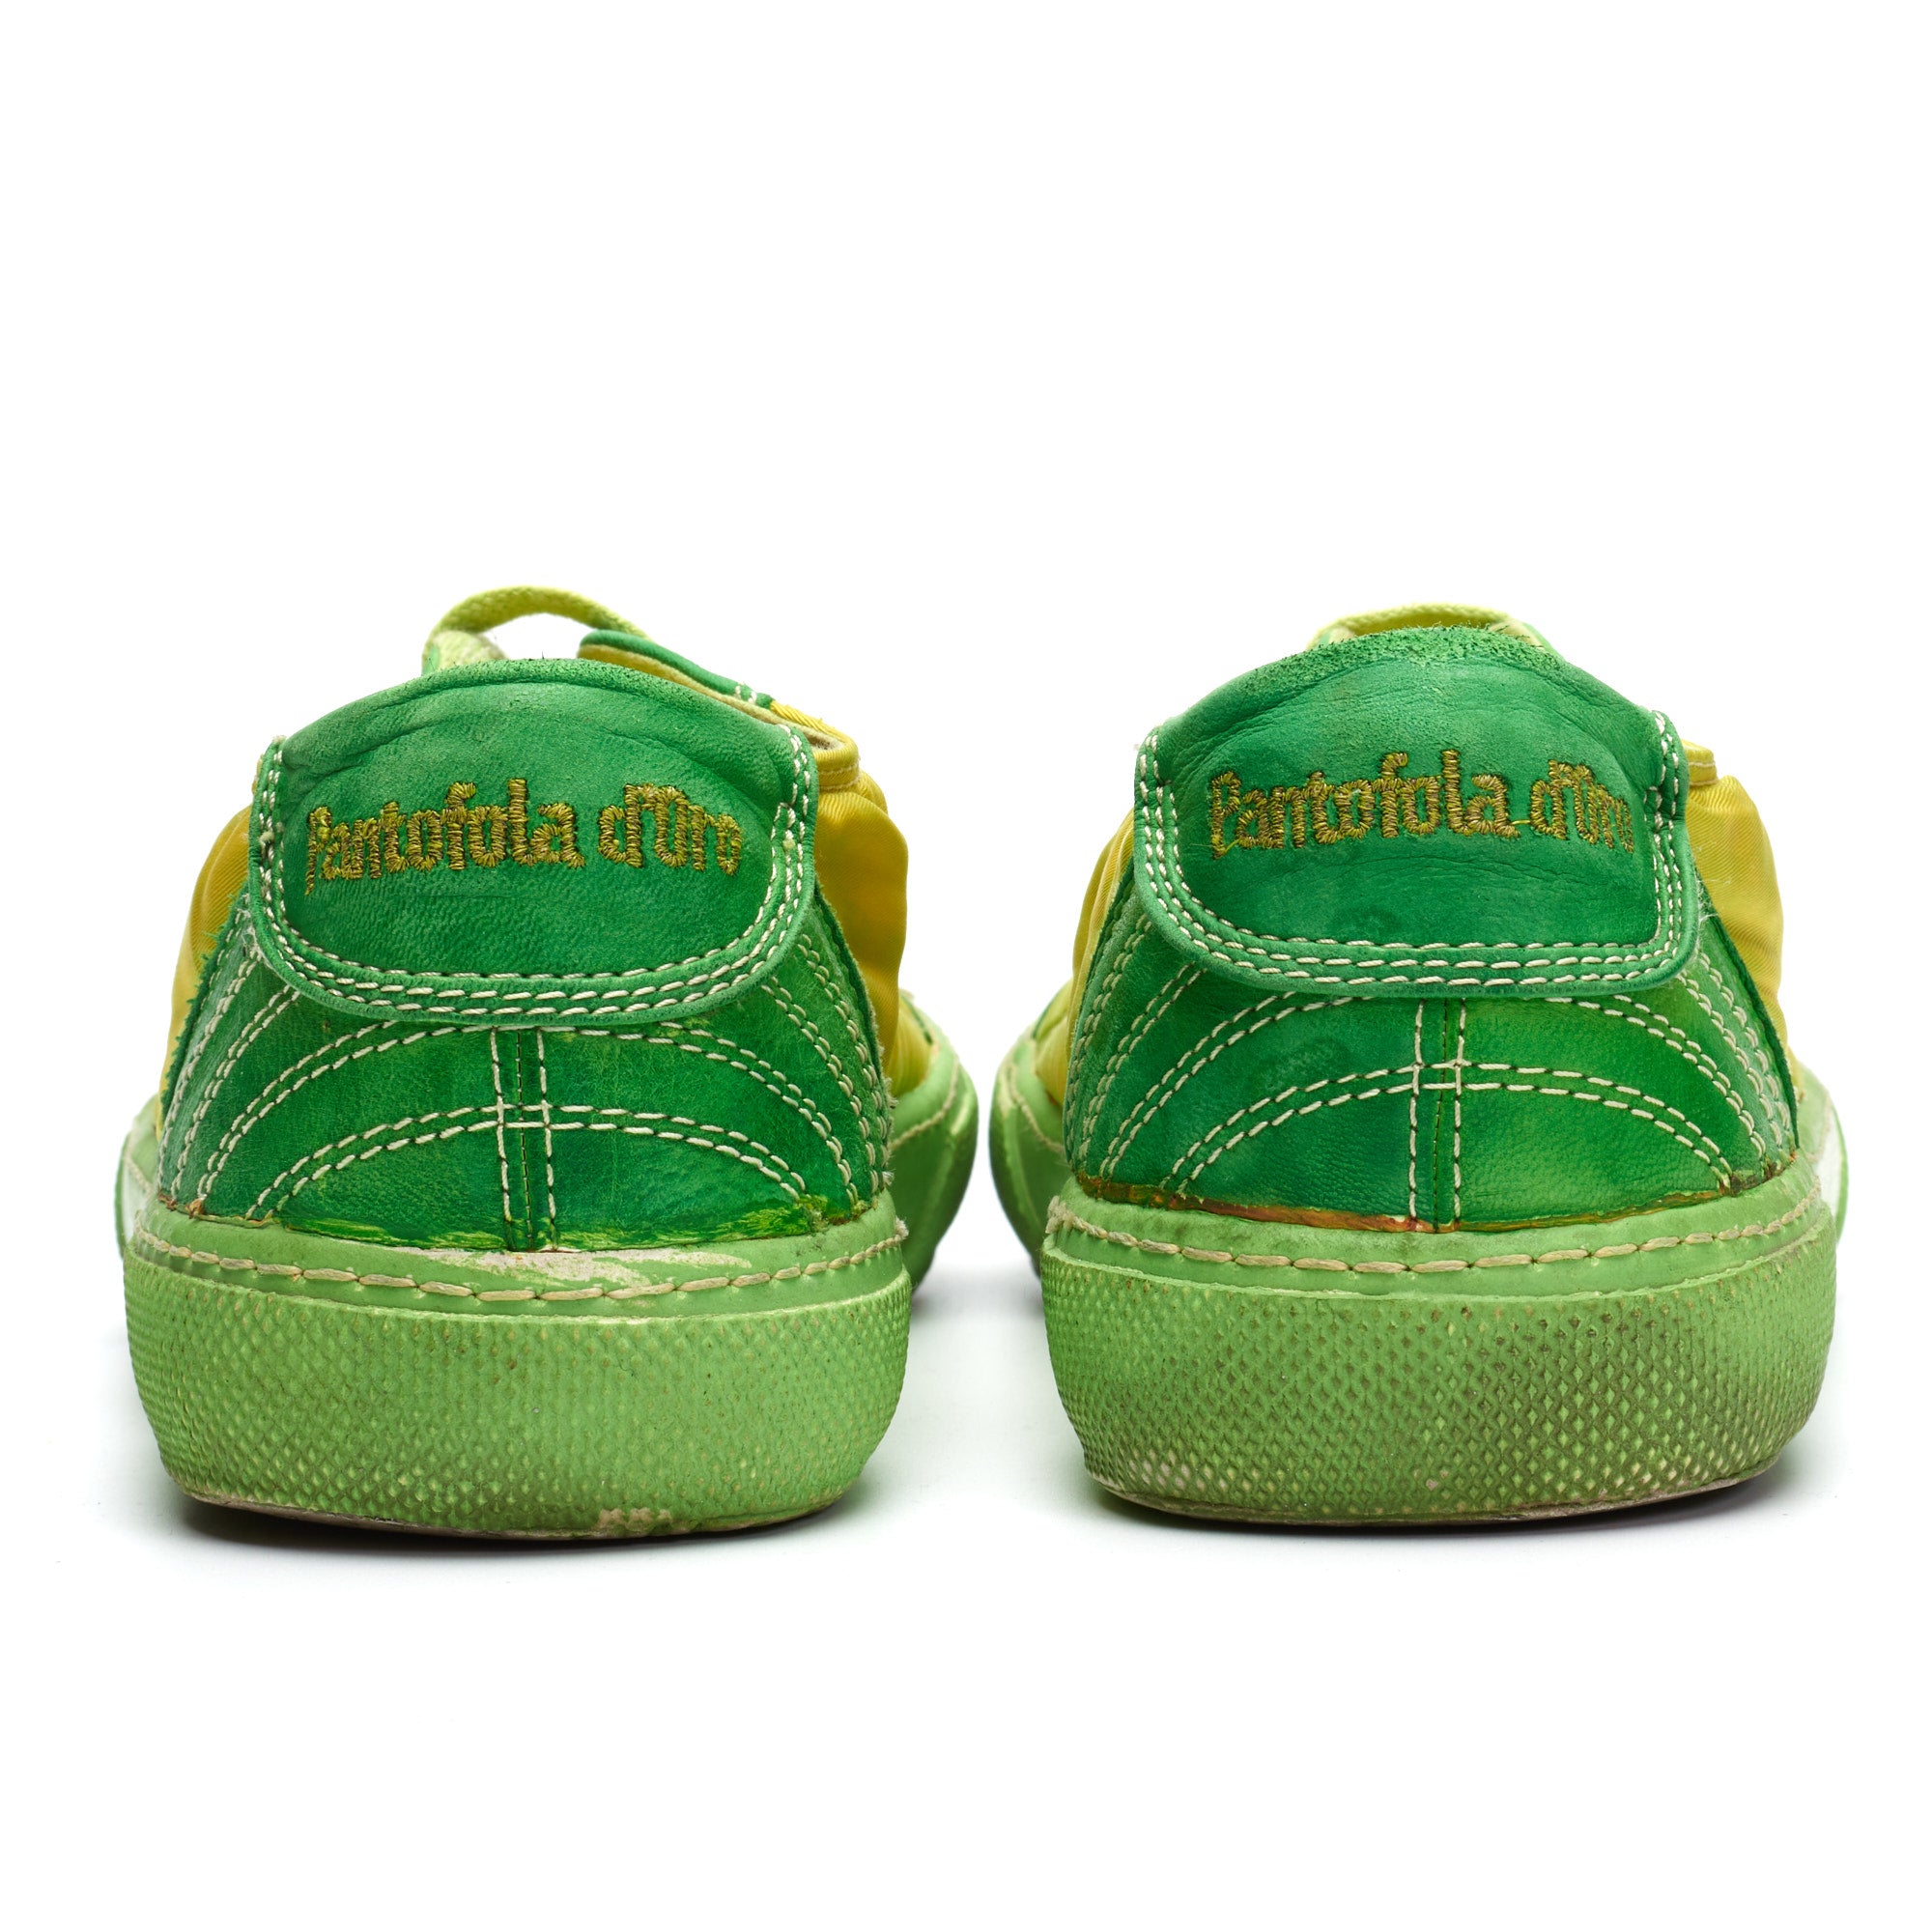 PANTOFOLA D'ORO Super Star Extra Green Leather Low Top Sneakers Shoes EU 43 US 10